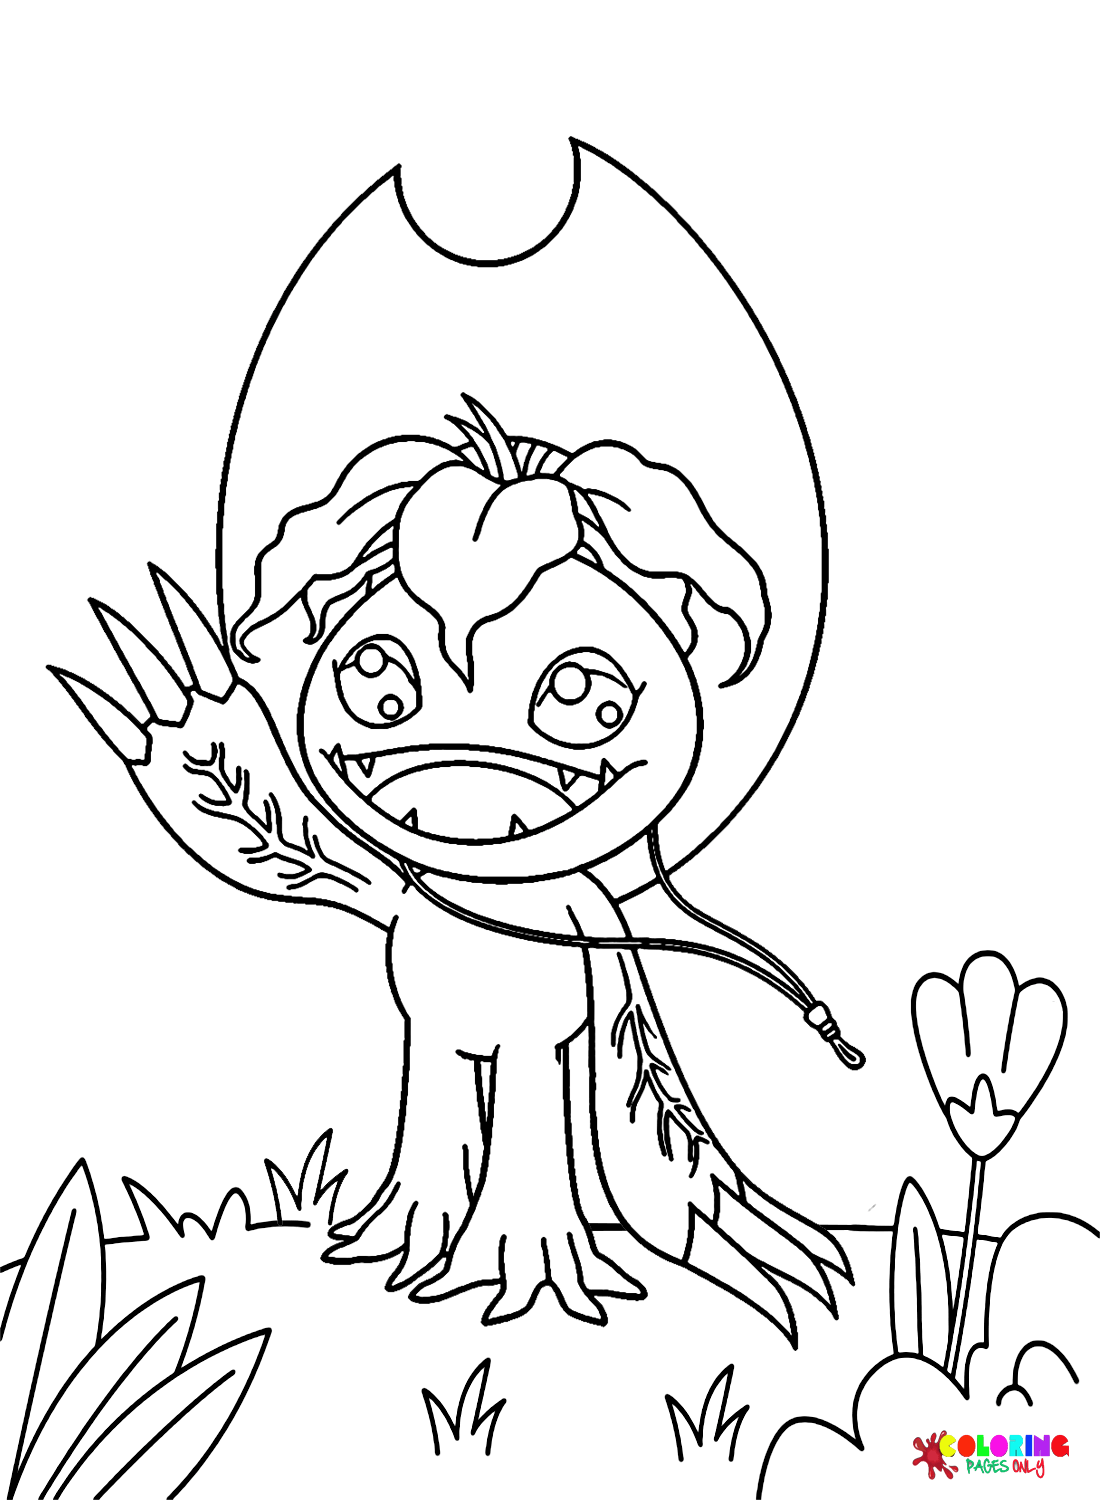 Palmon Laughs Coloring Page